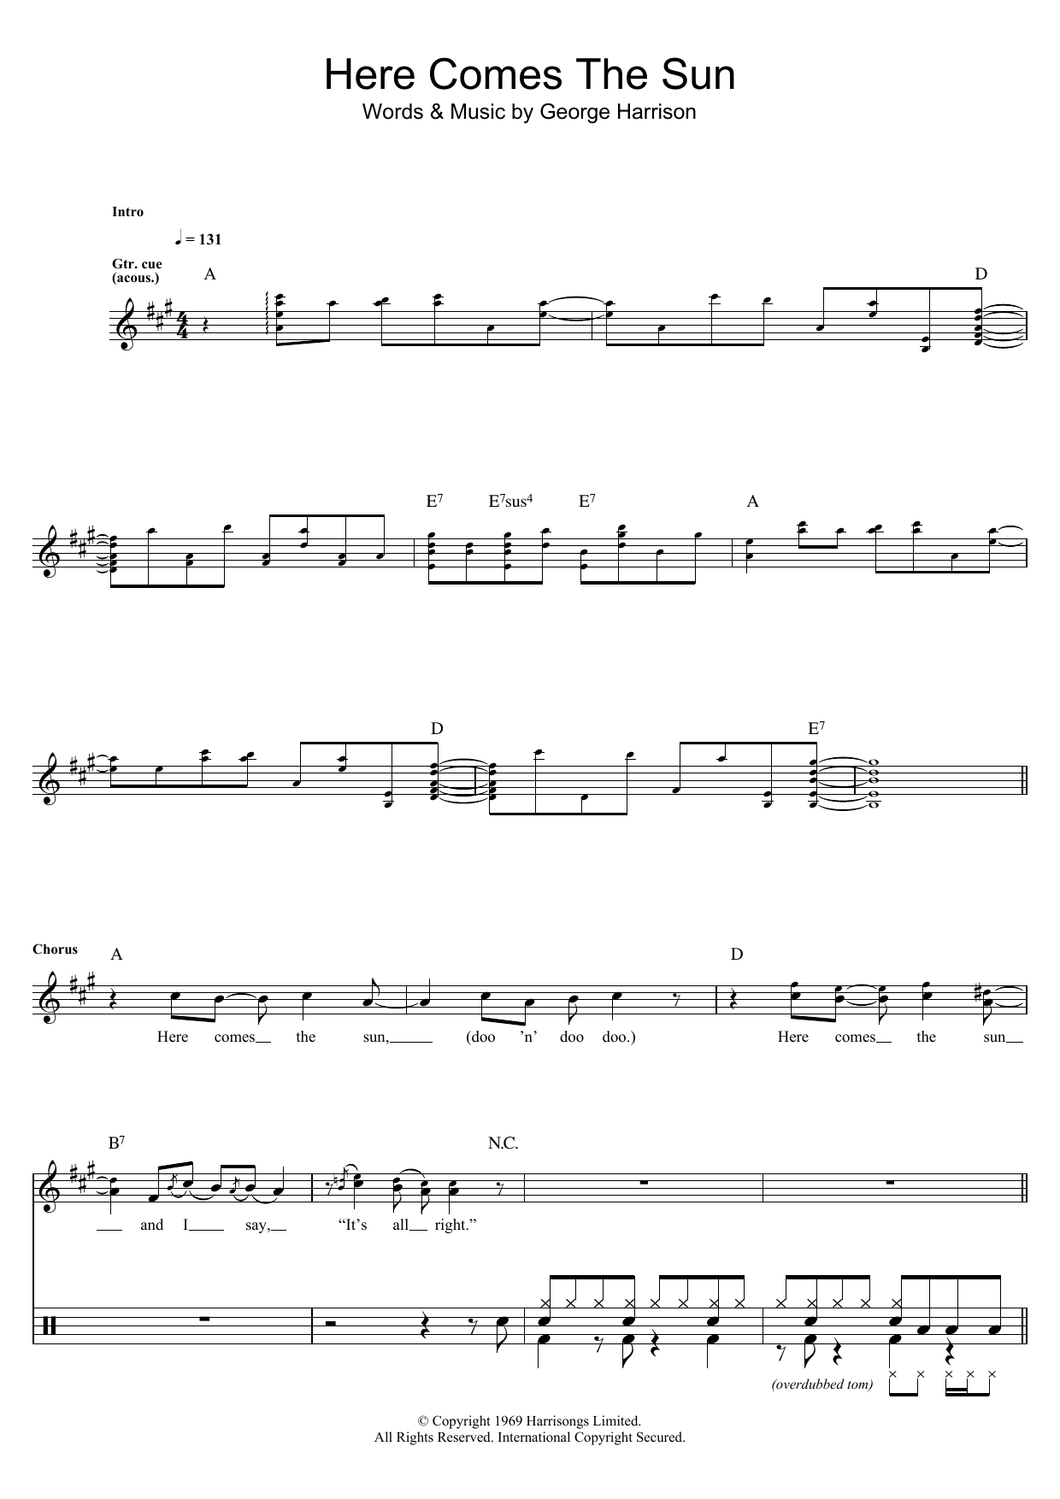 Here Comes the Sun - The Beatles - Full Drum Transcription / Drum Sheet Music - SheetMusicDirect D